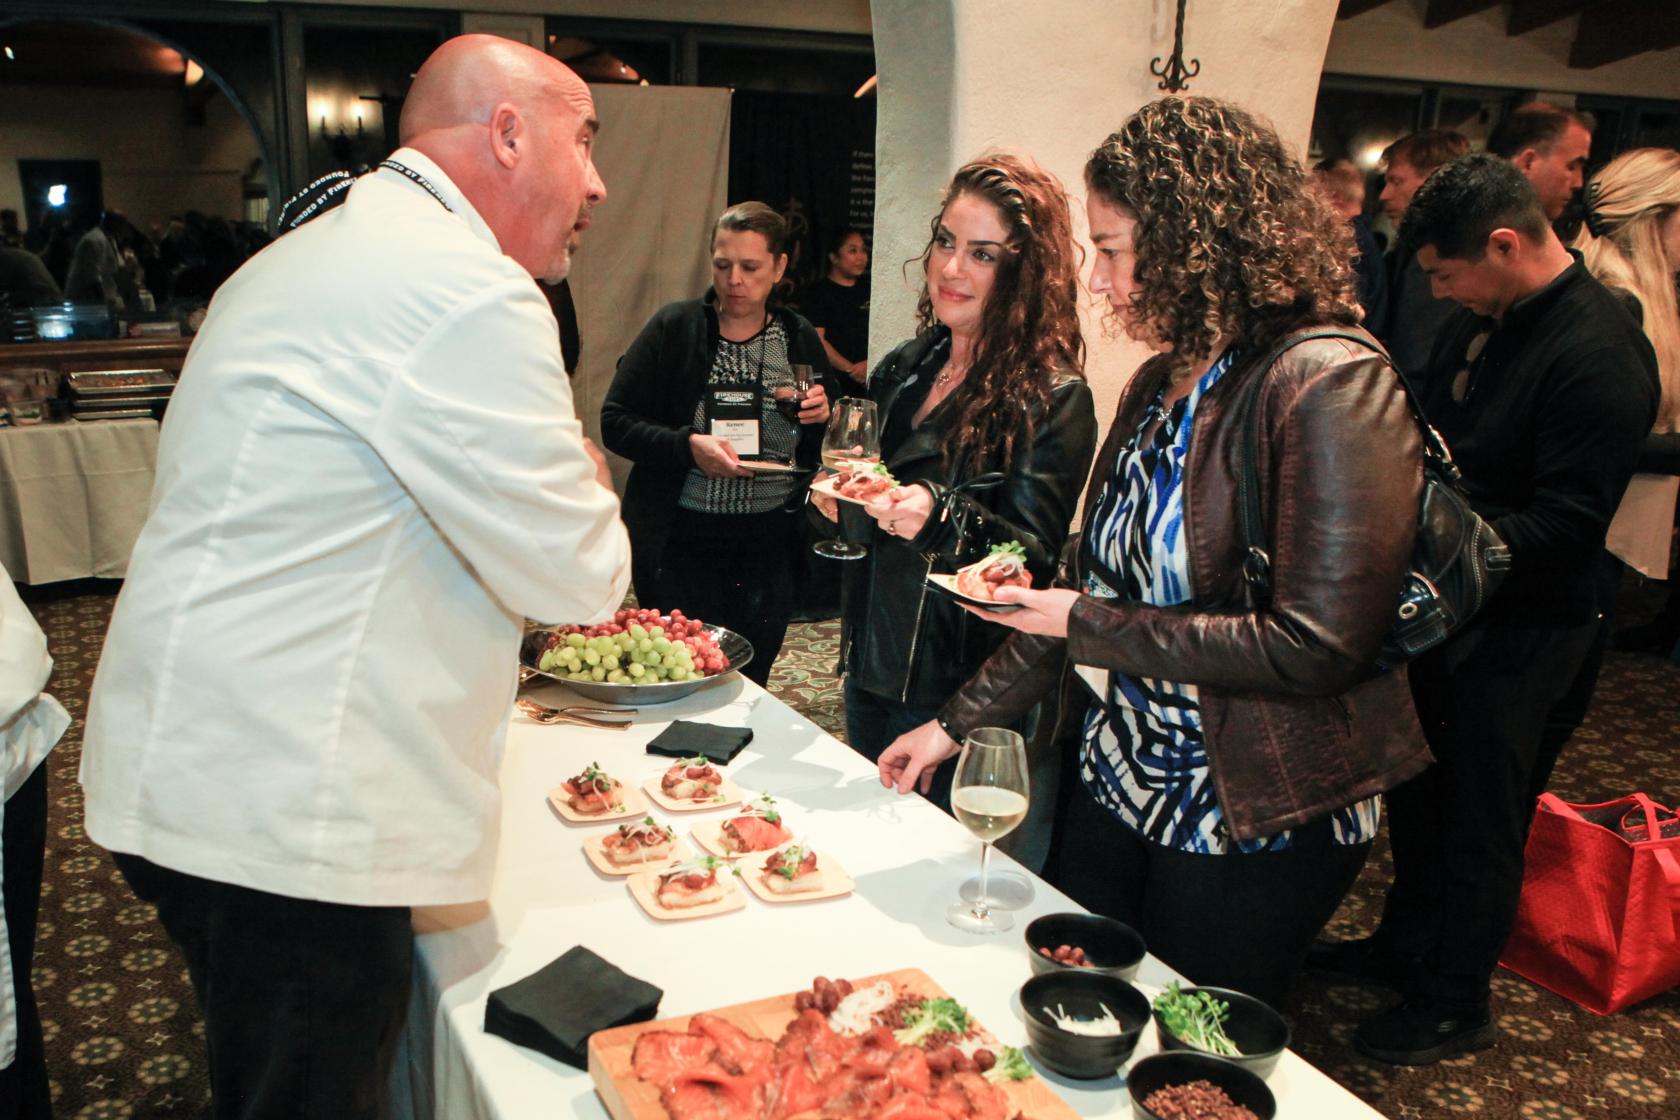 Executive Chef Brian Smith speaking with conference attendees